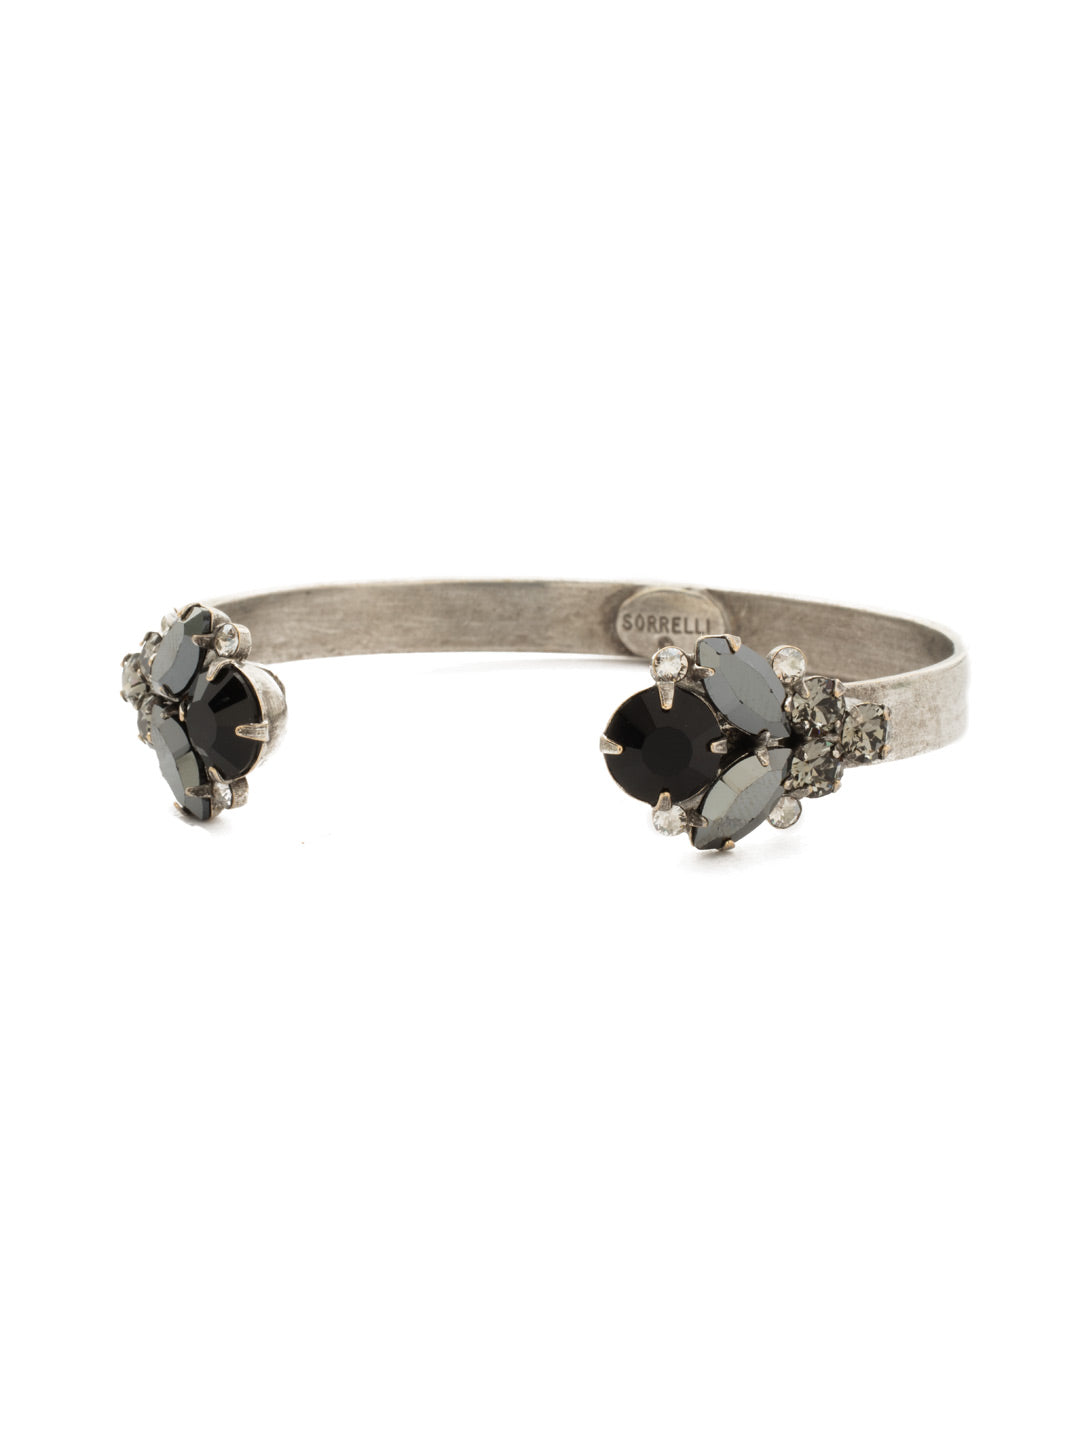 Crystal Cluster Cuff Bracelet - BCW17ASBON - Two crystal clusters adorn this open cuff bracelet to add well needed sparkle to any arm party! From Sorrelli's Black Onyx collection in our Antique Silver-tone finish.